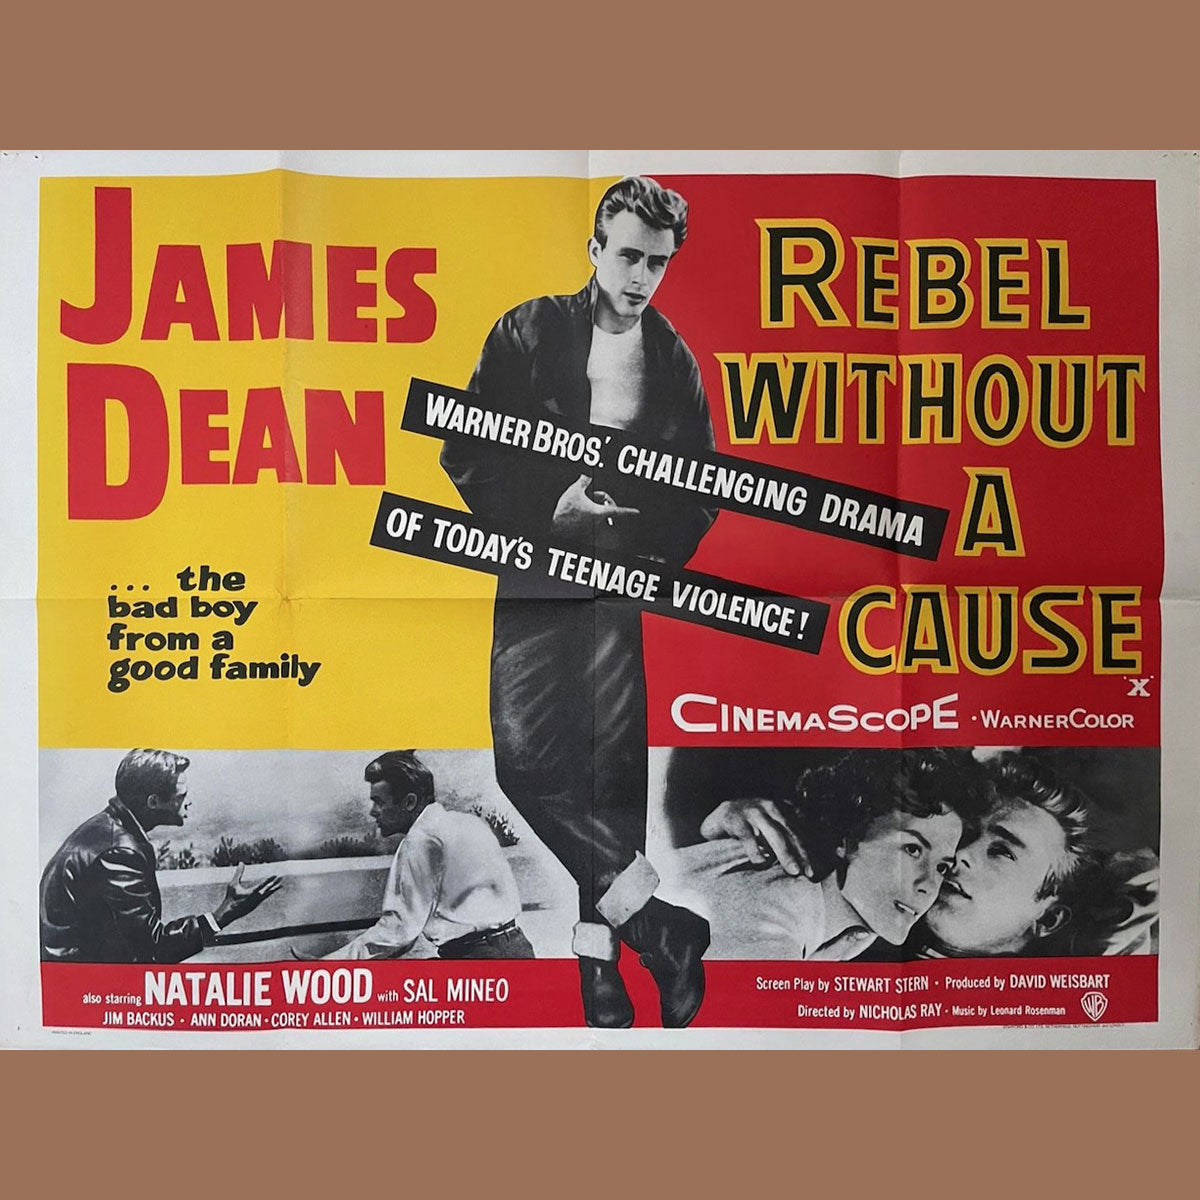 Rebel Without A Cause (1955)